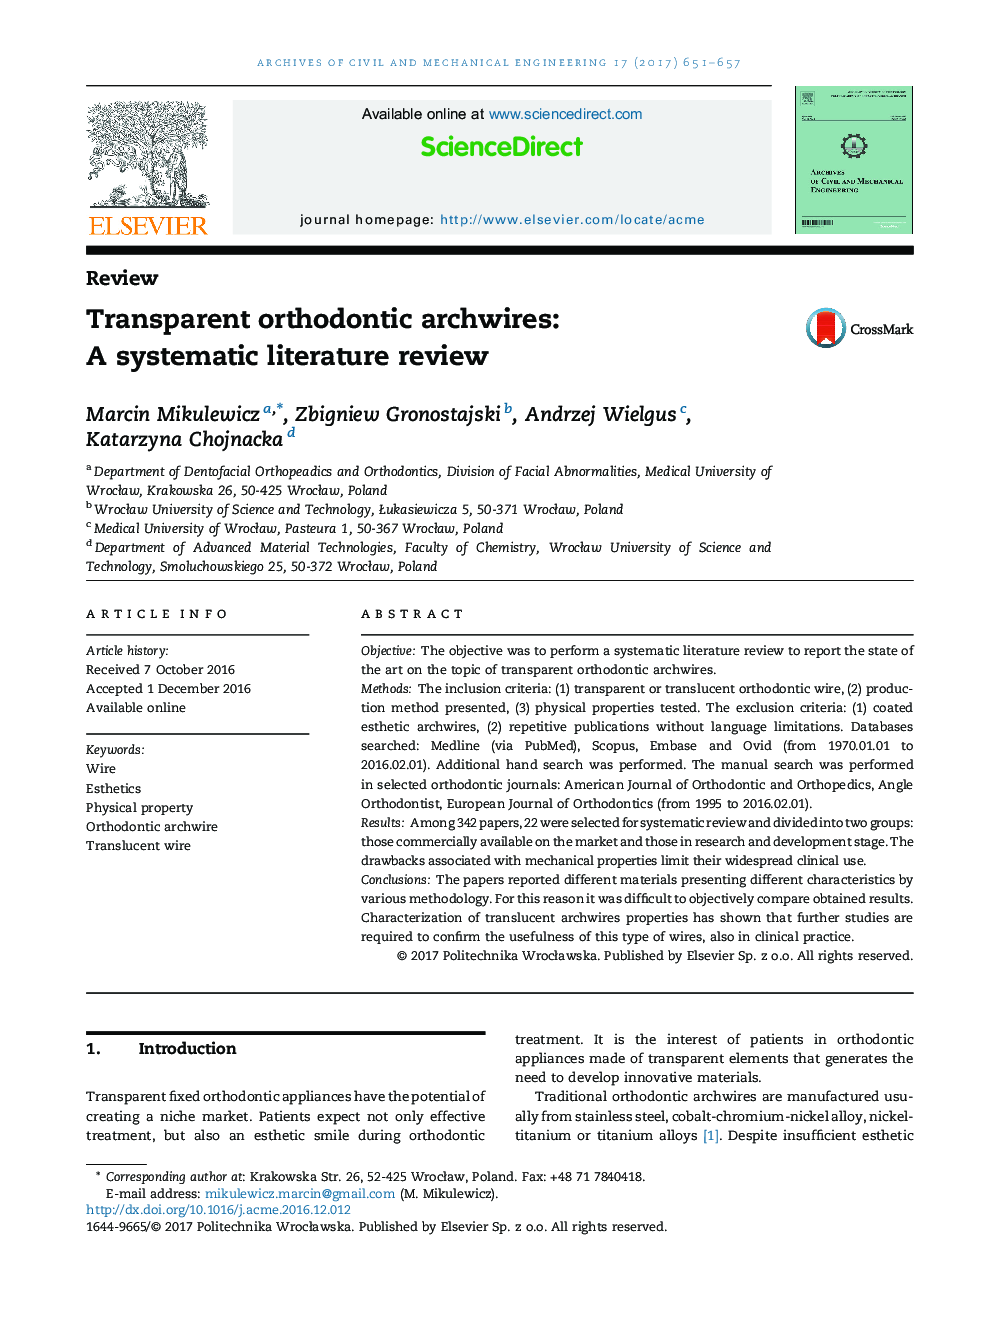 Transparent orthodontic archwires: A systematic literature review